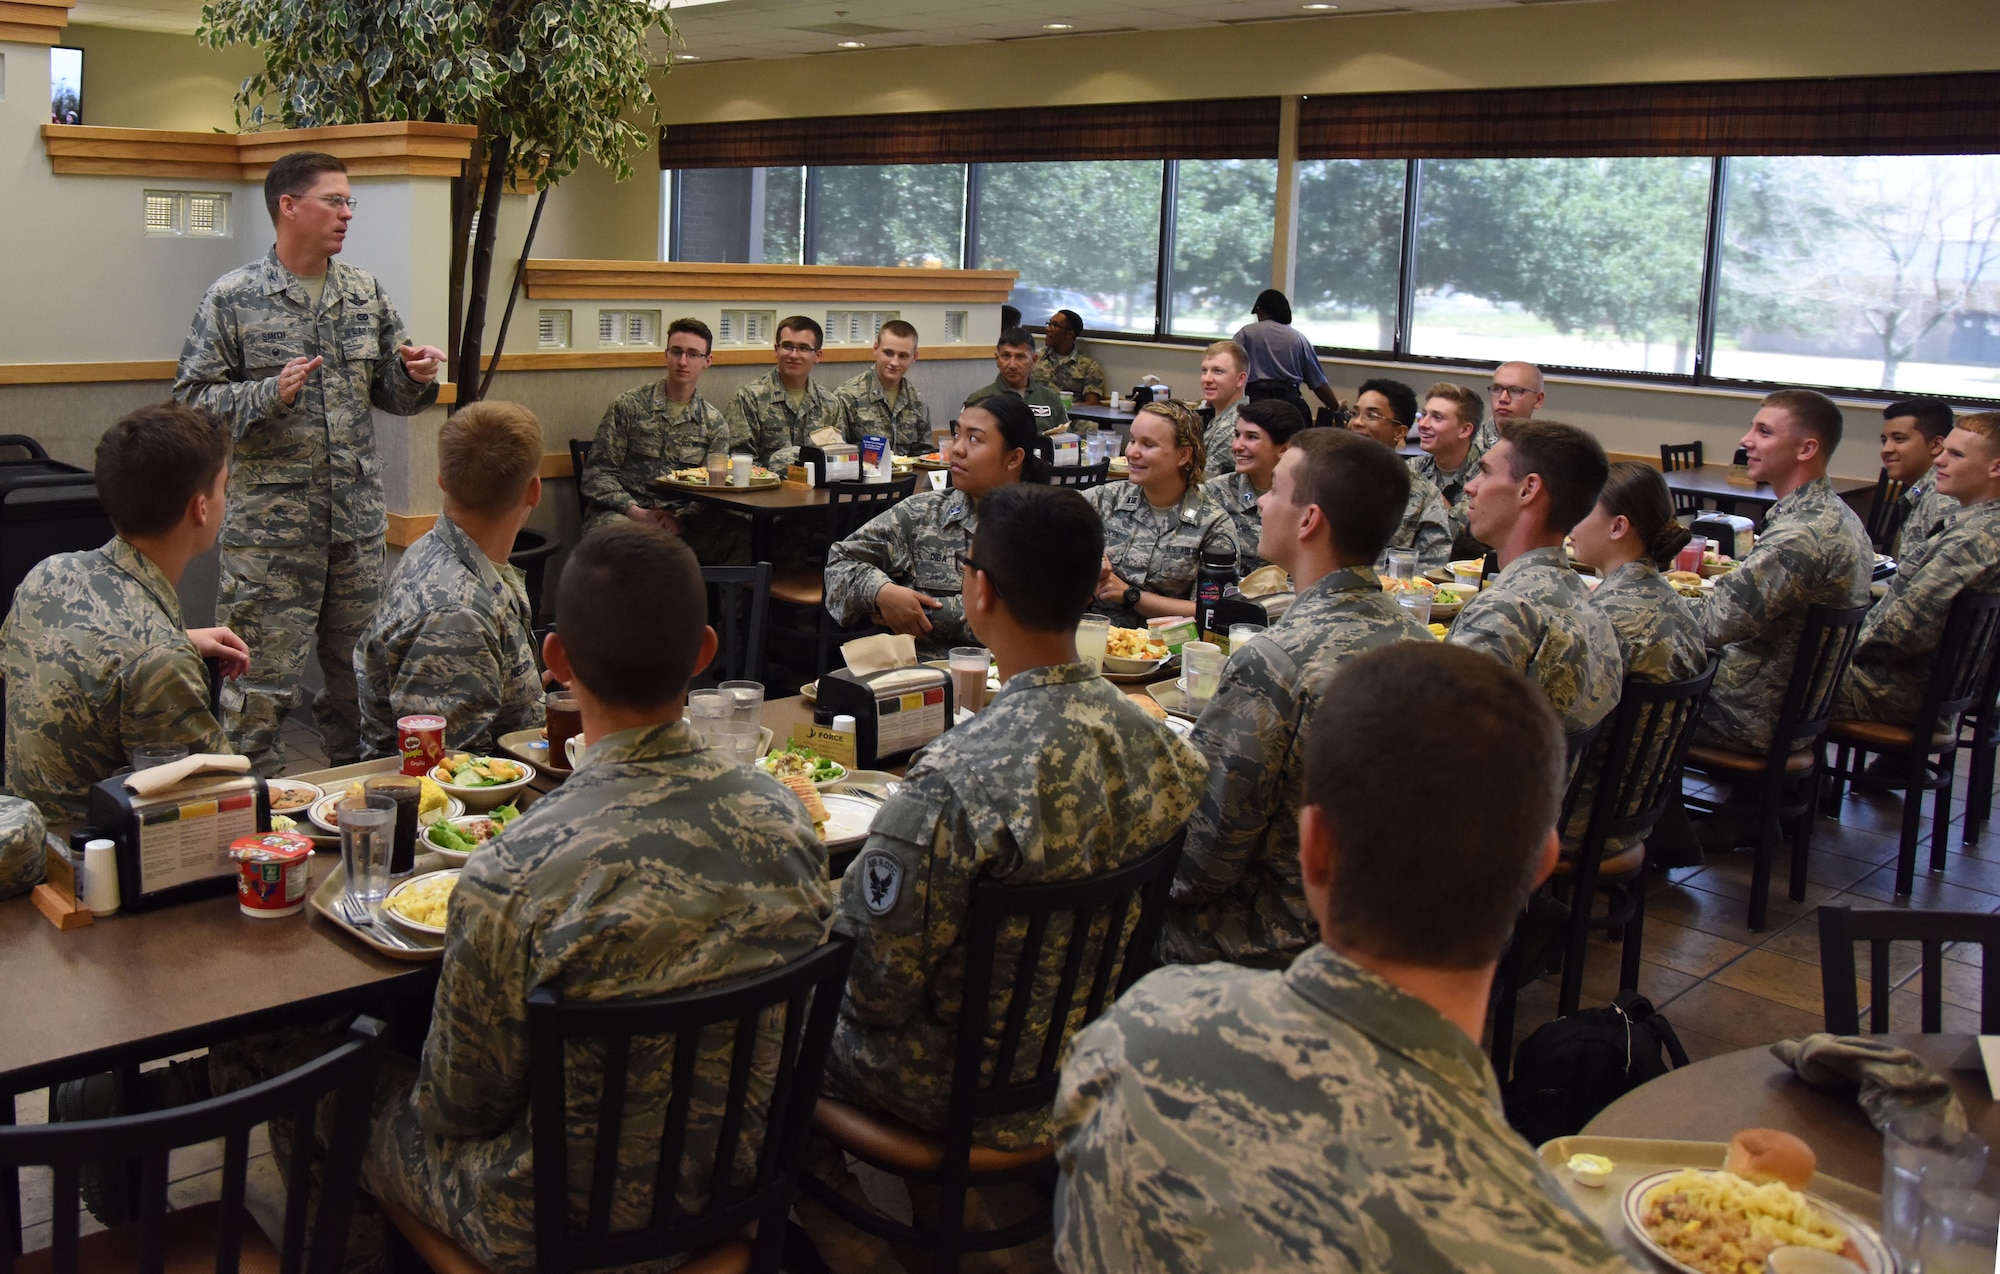 U.S. Air Force Col. C. Mike Smith, 81st Training Wing vice commander, provides comments to ROTC cadets during a mentorship luncheon in the Azalea Dining Facility at Keesler Air Force Base, Mississippi, July 9, 2018. Cadets from various college and university ROTC programs attended a two-and-a-half-week professional development training course during their stay at Keesler. (U.S. Air Force photo by Kemberly Groue)